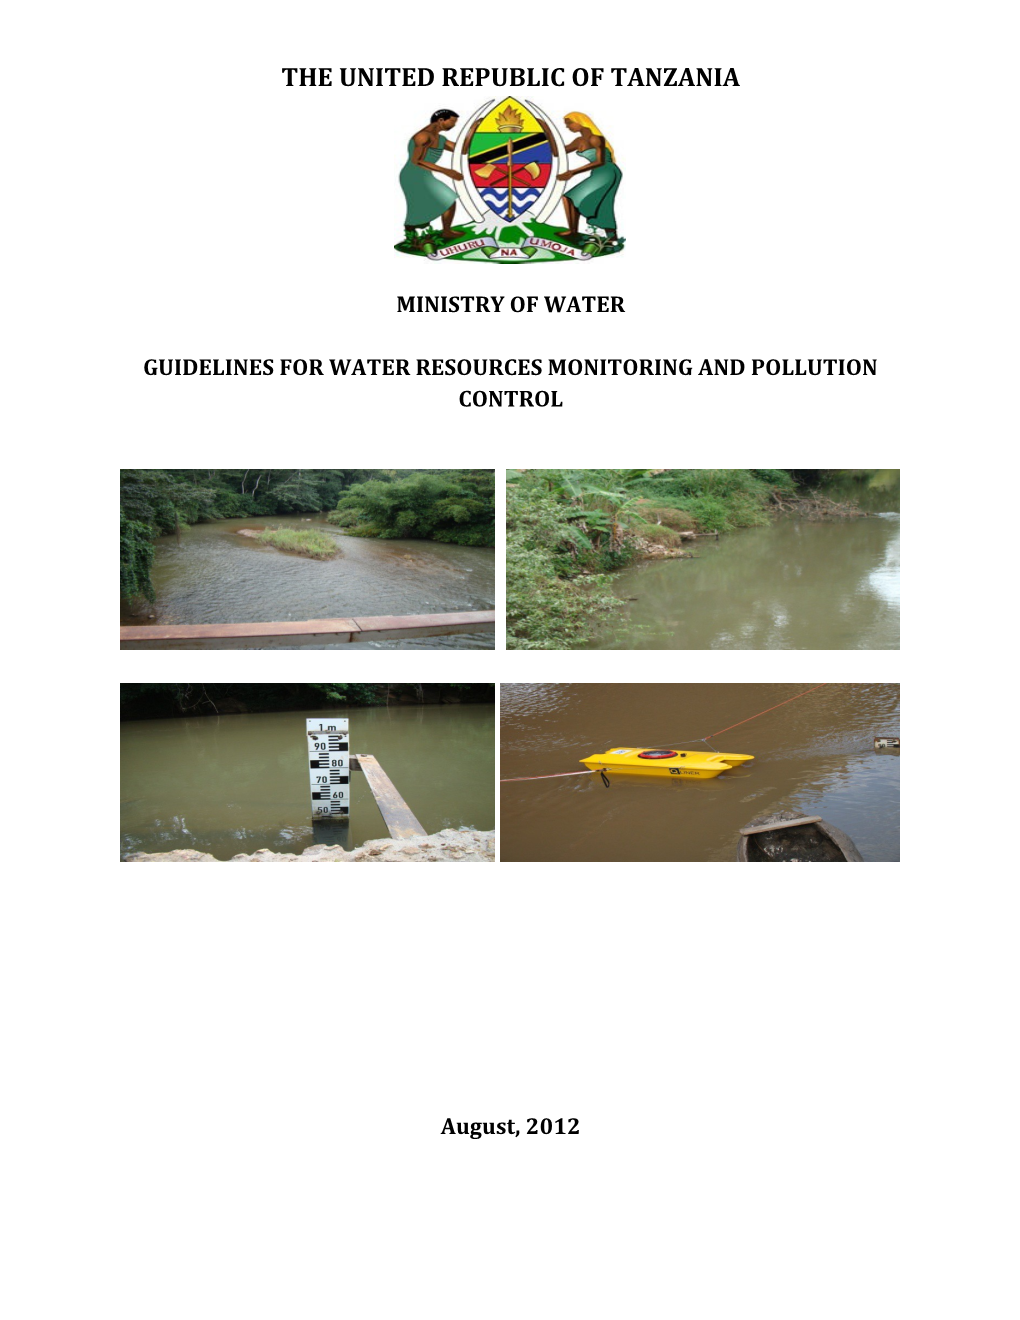 Monitoring Guidelines for Pollution Control in Water Resources